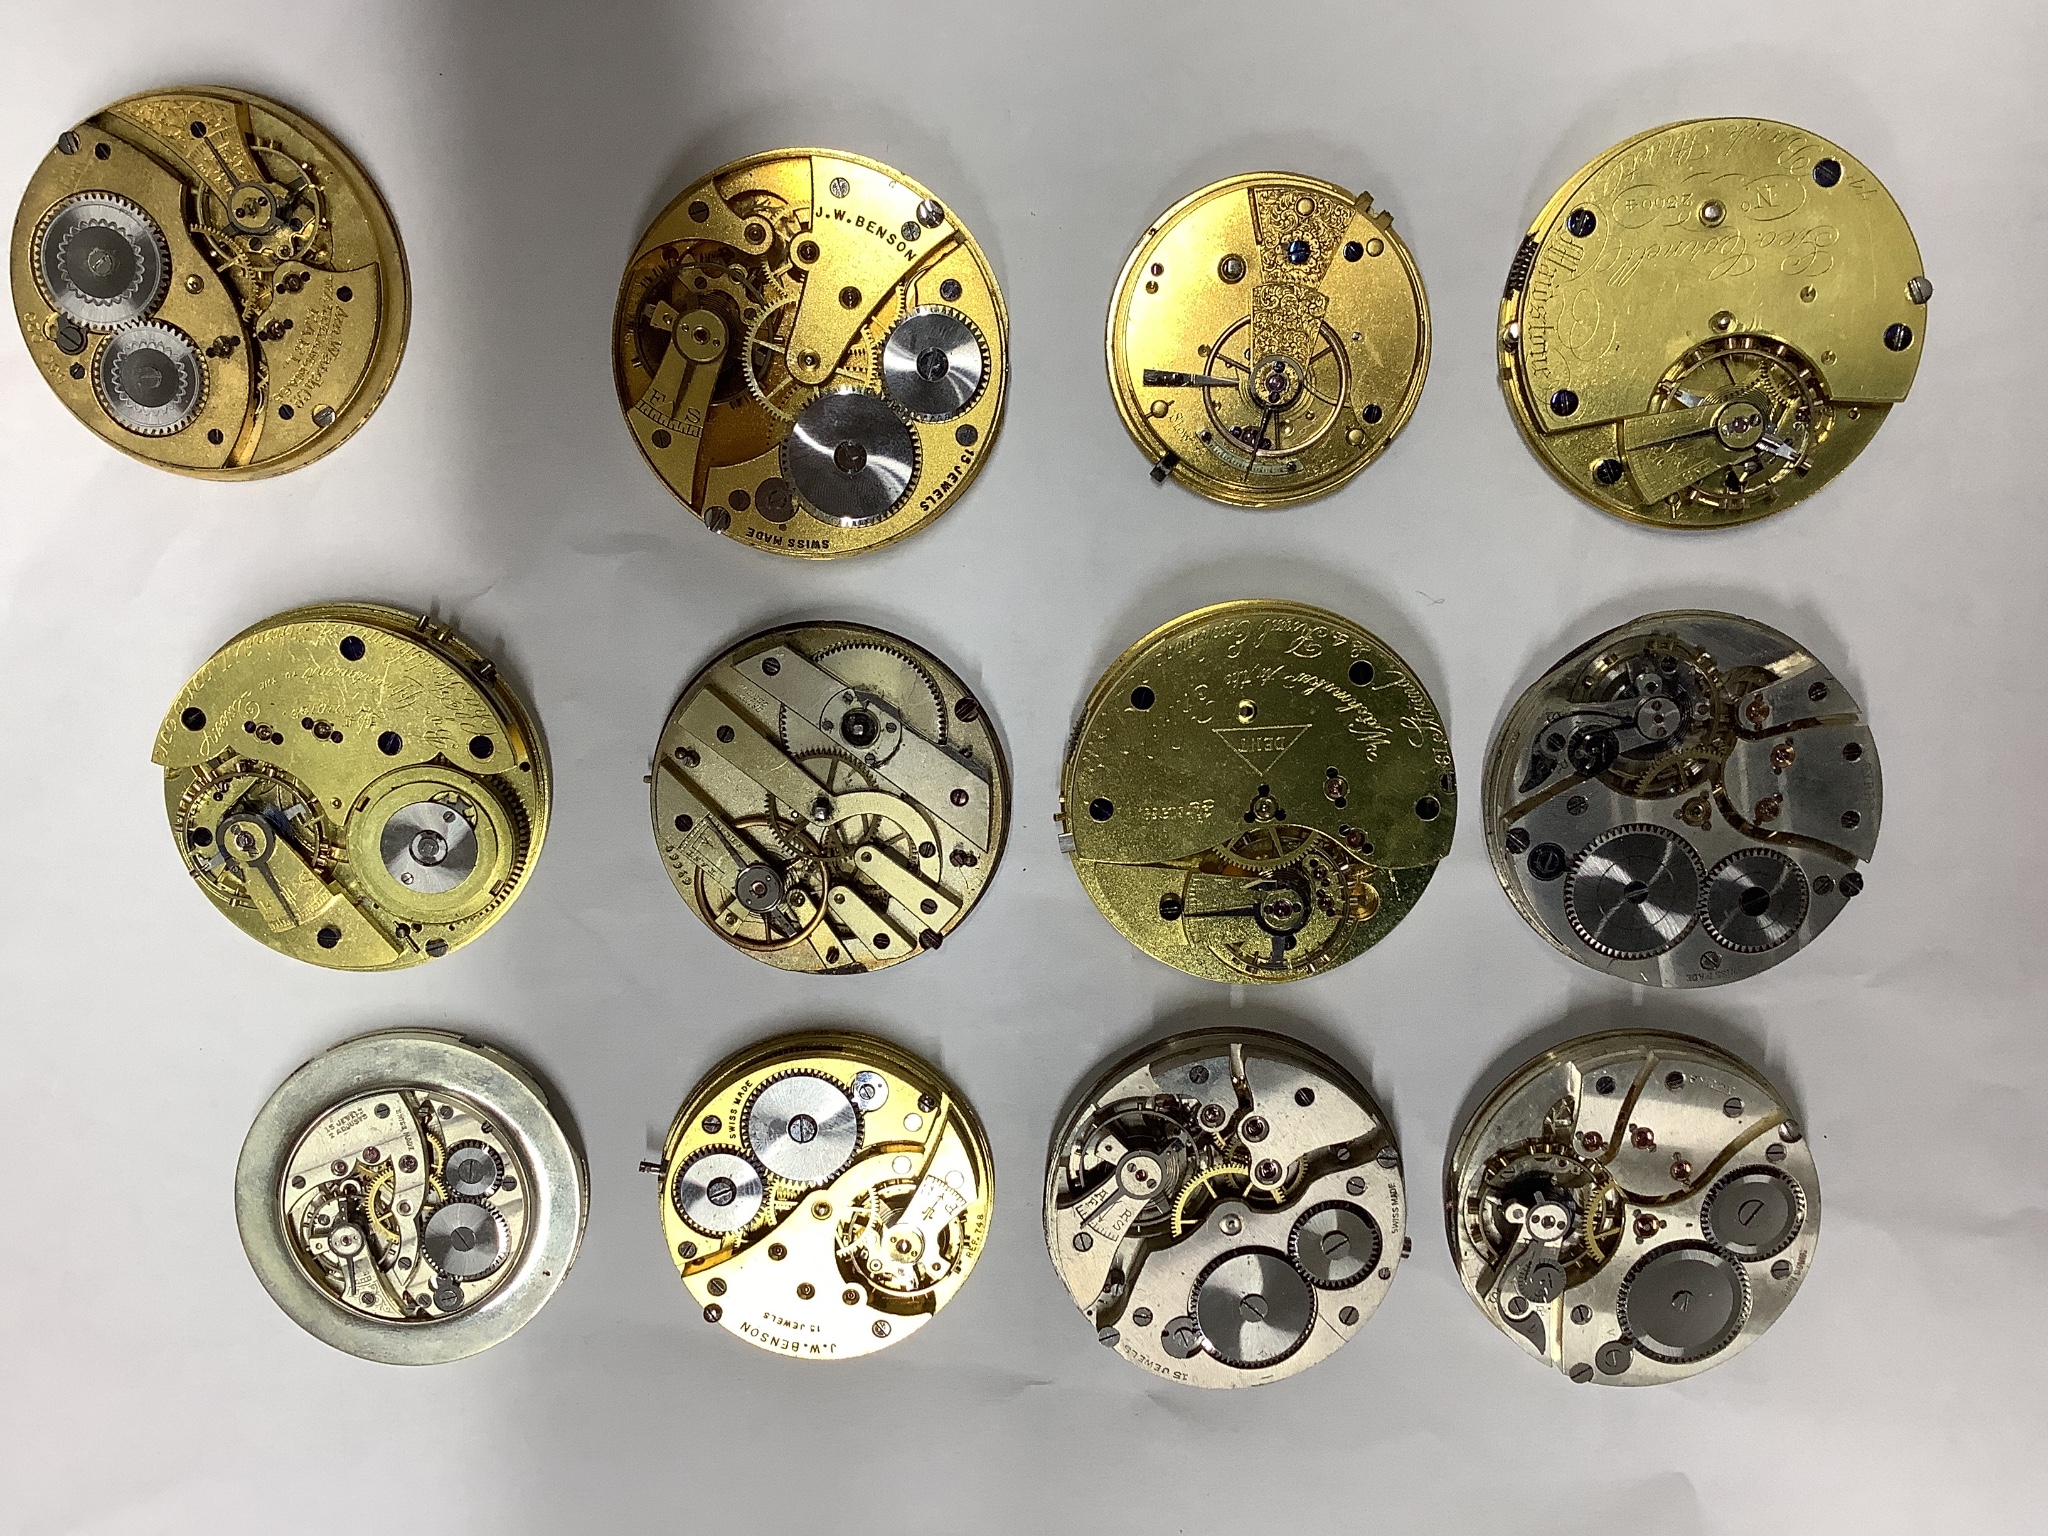 A small collection of assorted pocket watch movements, including Waltham & Tavannes.